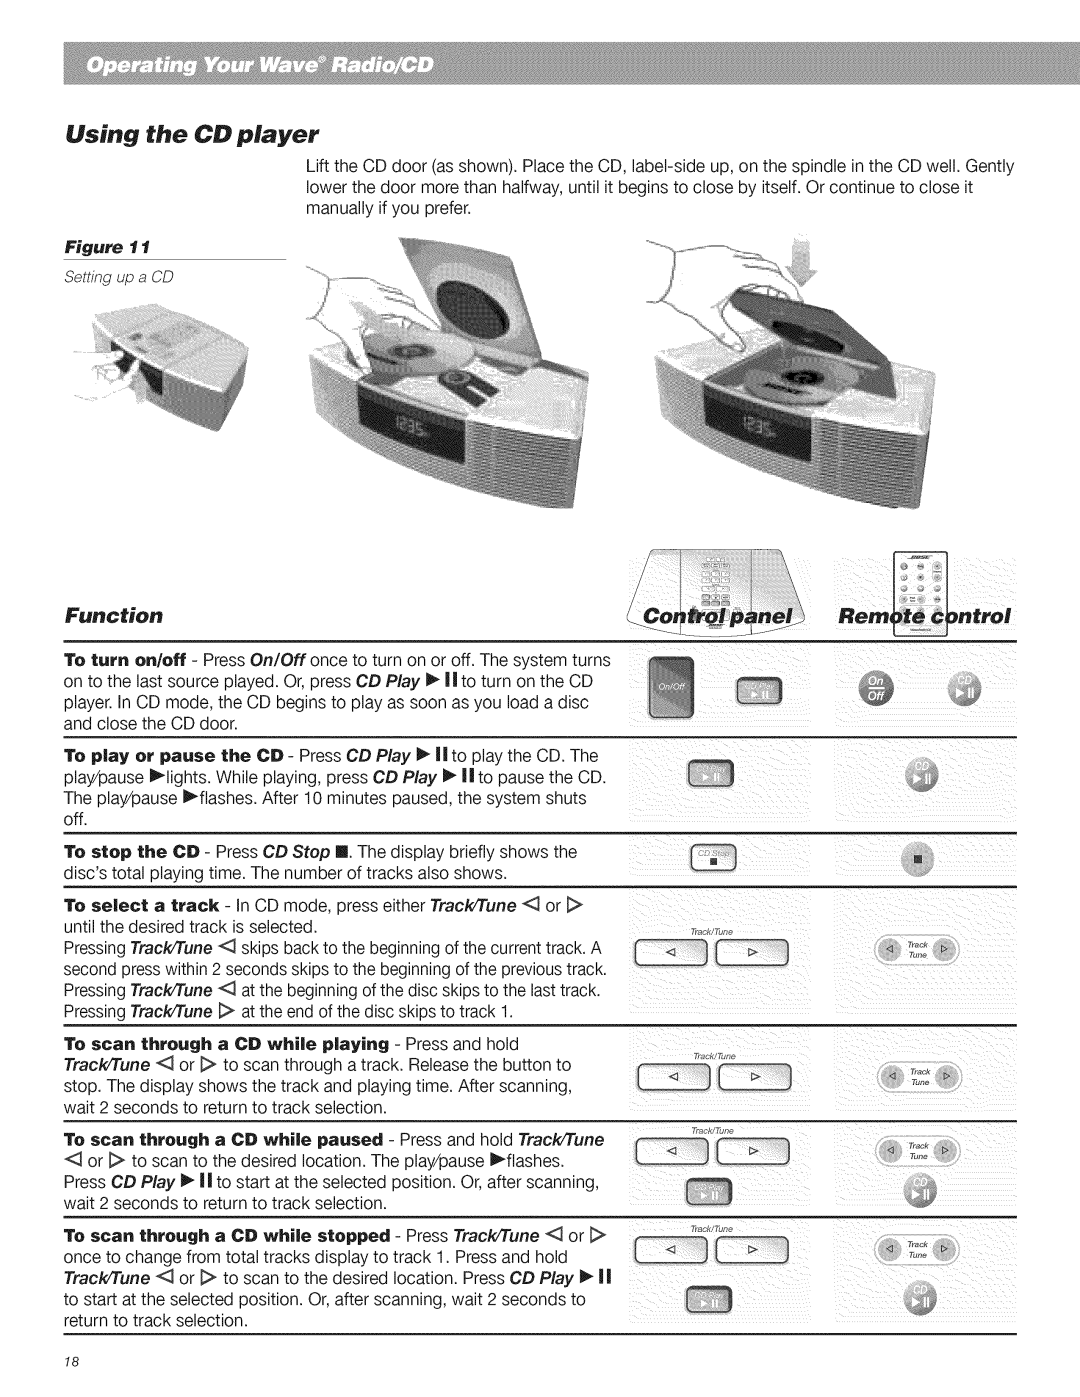 Bose CD Player manual Using the CD player, Function, Setting up a CD 